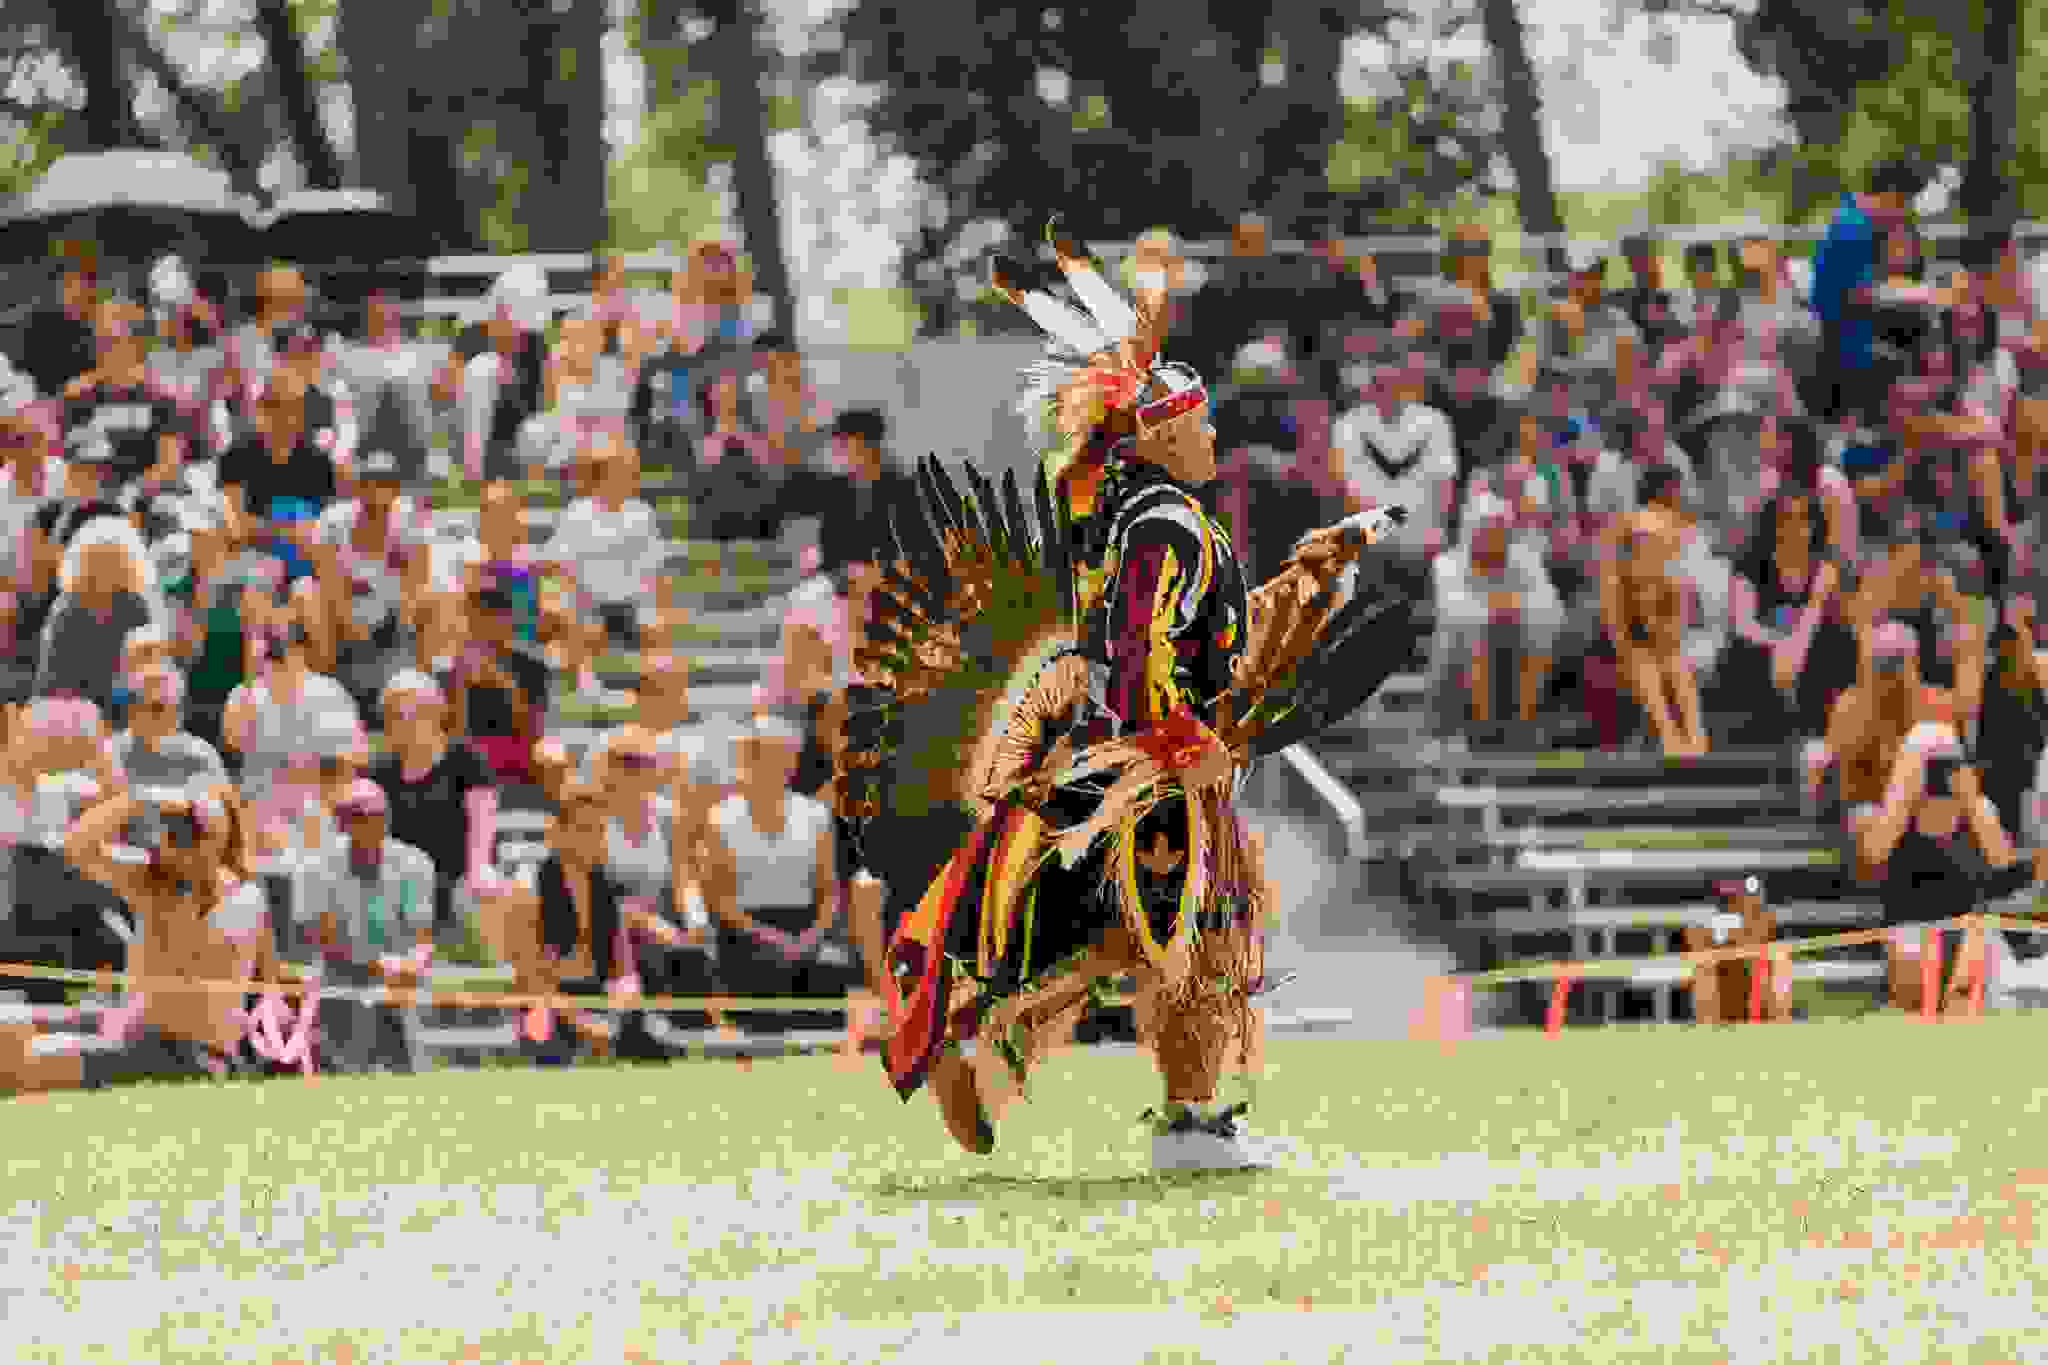 Things to consider for your first pow wow